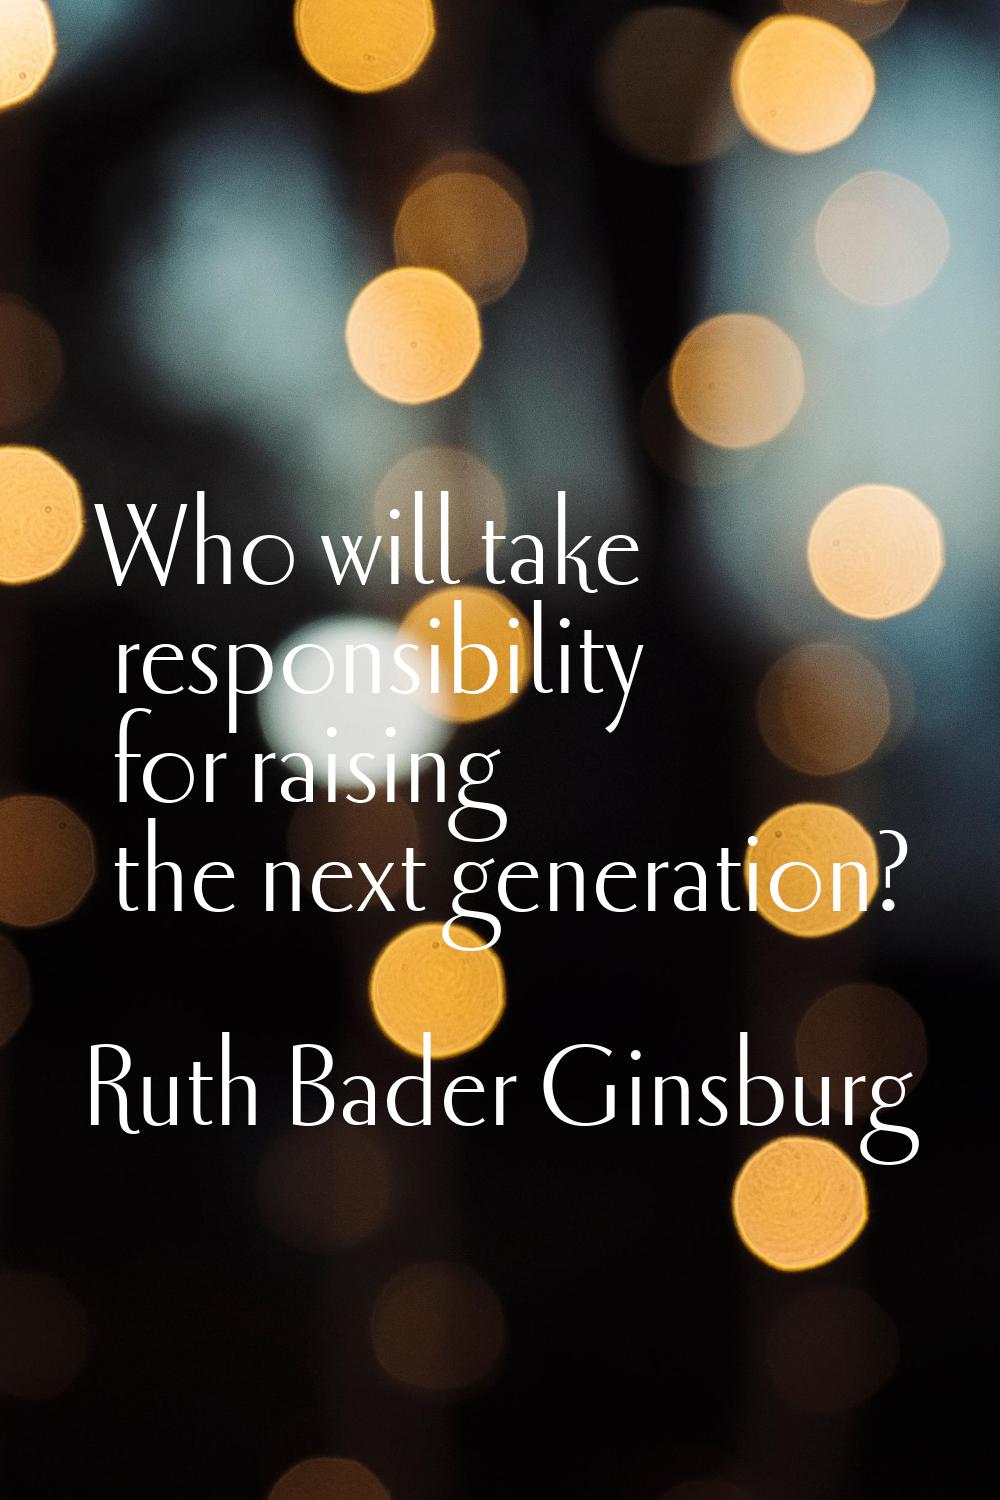 Who will take responsibility for raising the next generation?